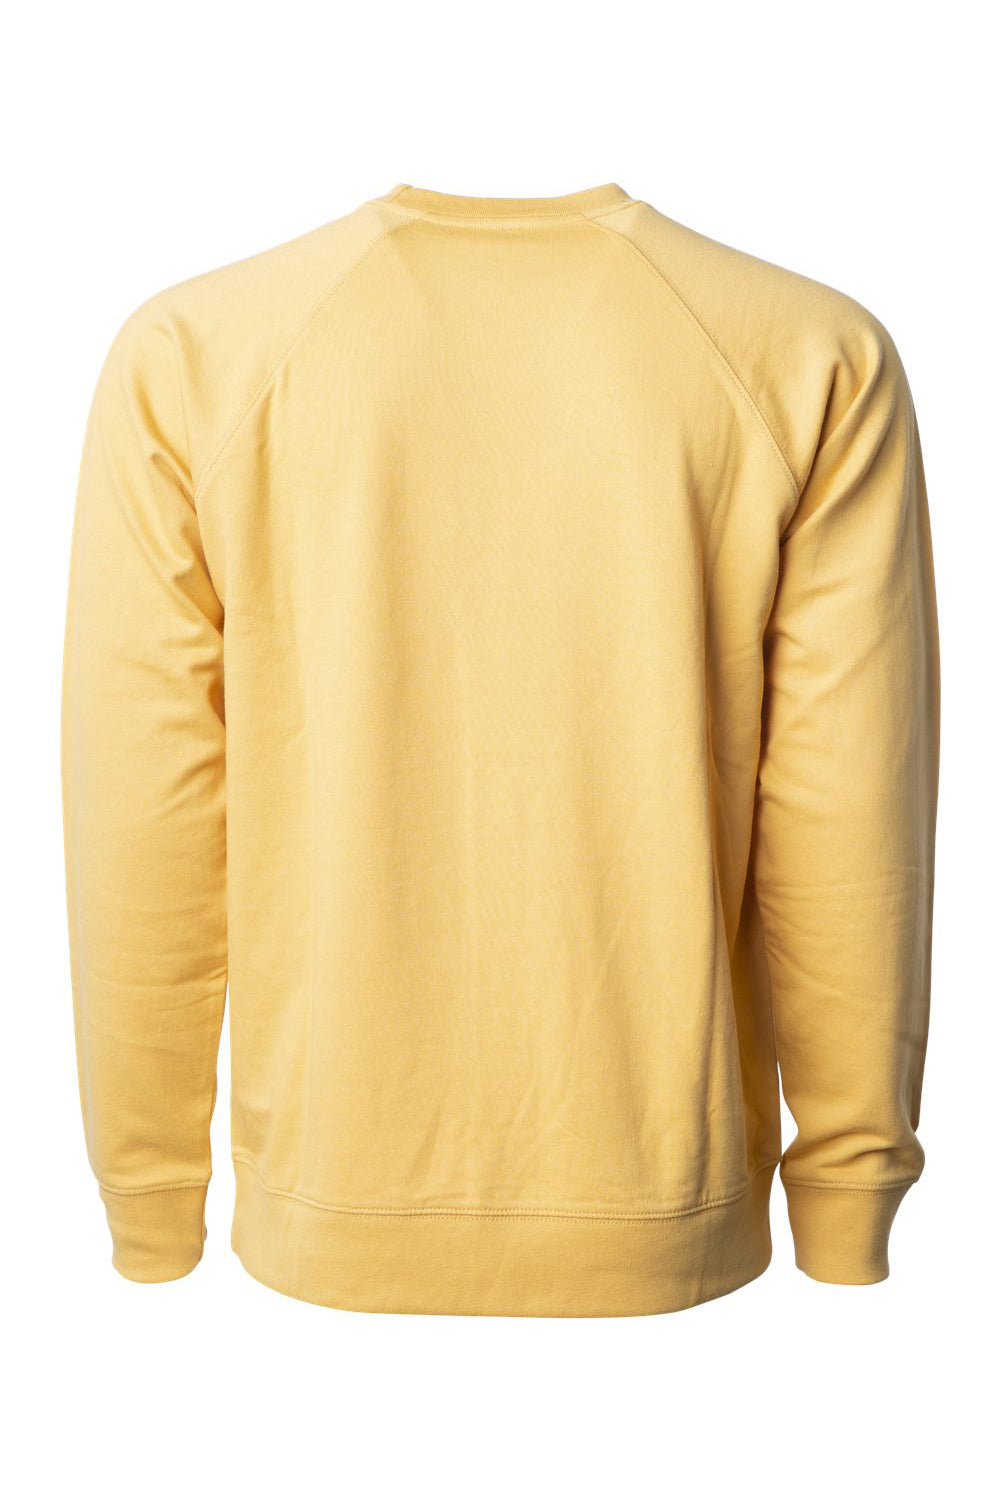 Independent Trading Co. SS1000C Mens Icon Loopback Terry Crewneck Sweatshirt Harvest Gold Flat Back